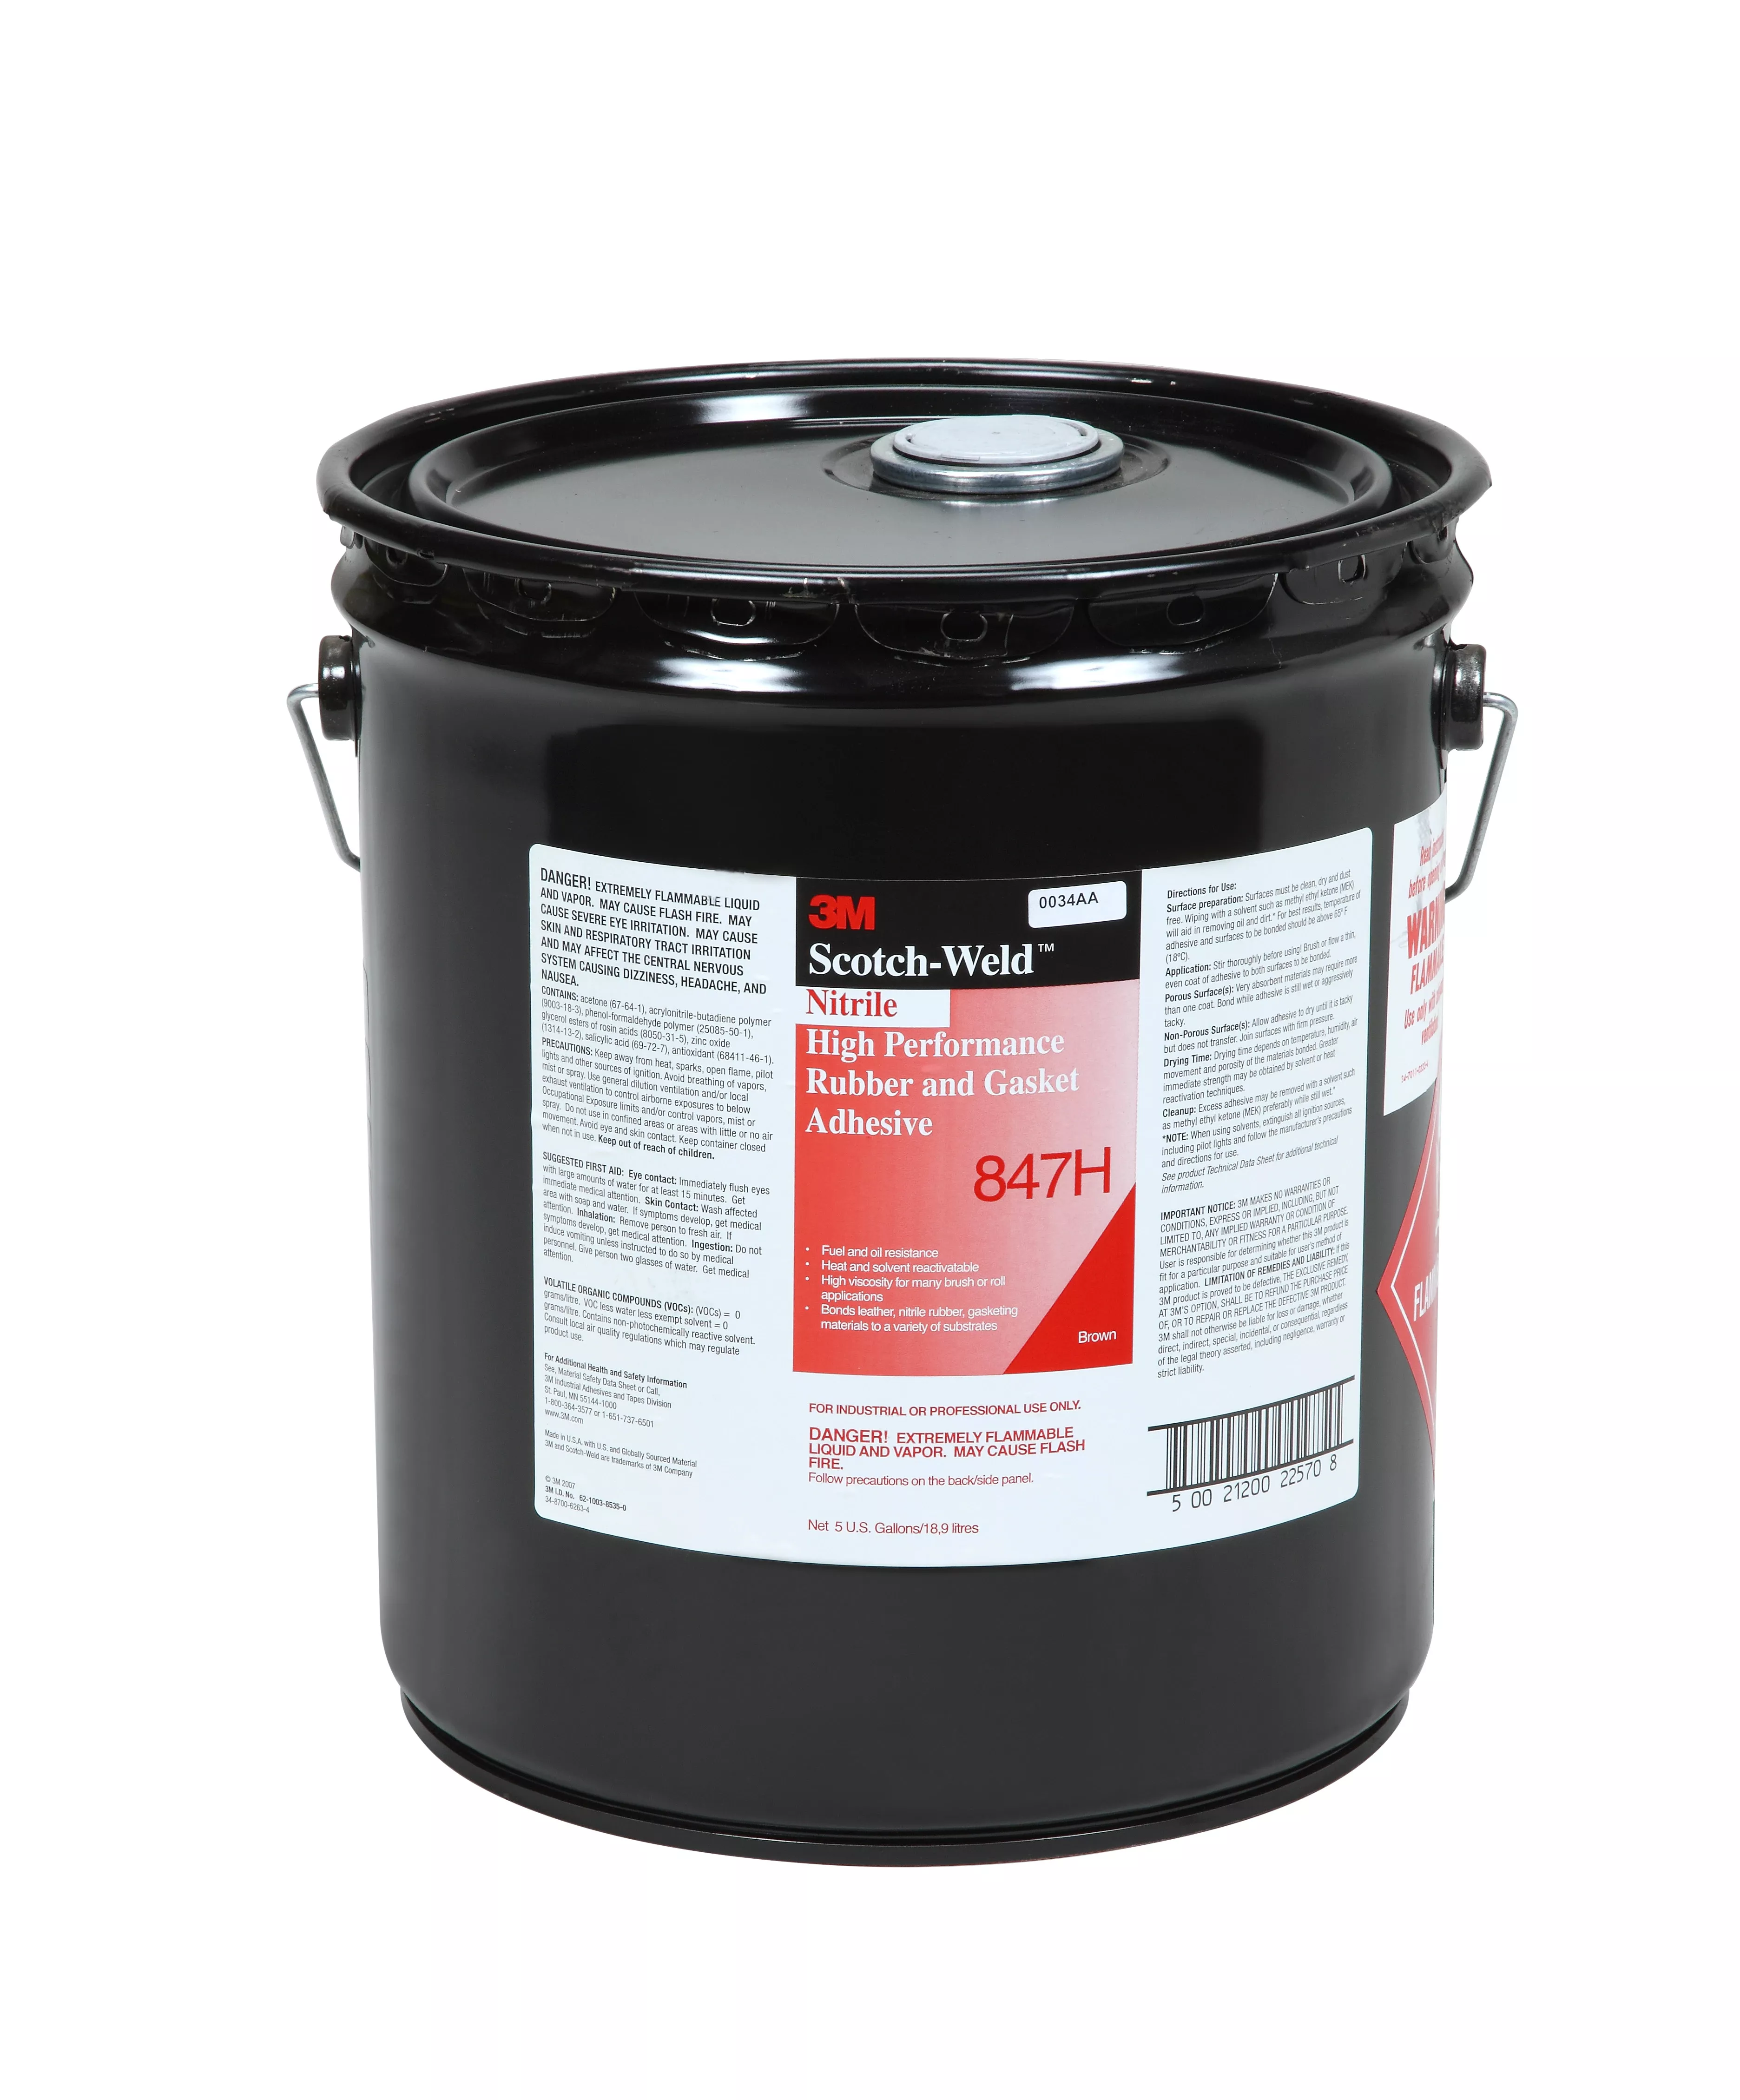 3M™ Nitrile High Performance Rubber and Gasket Adhesive 847H, Brown, 5
Gallon (Pail), Drum